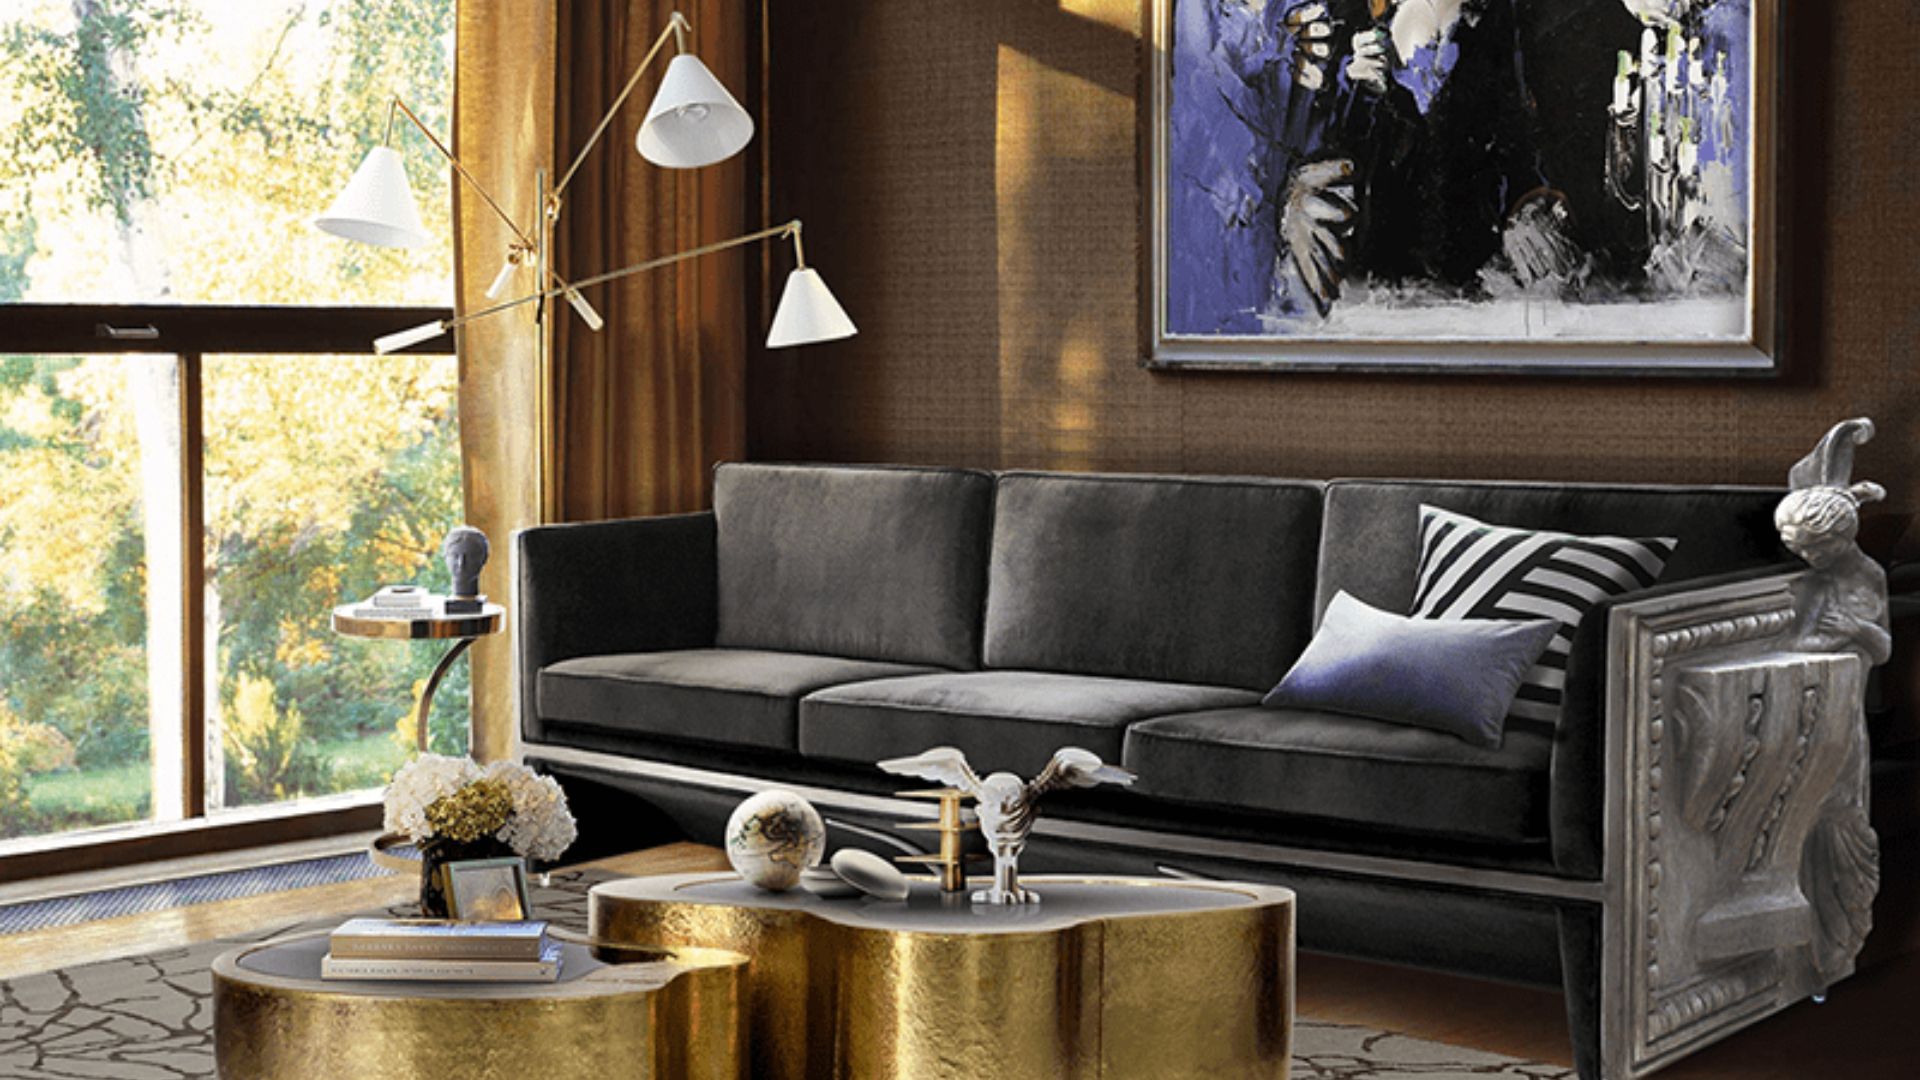 How to Care for Luxury Furniture to Ensure Longevity?